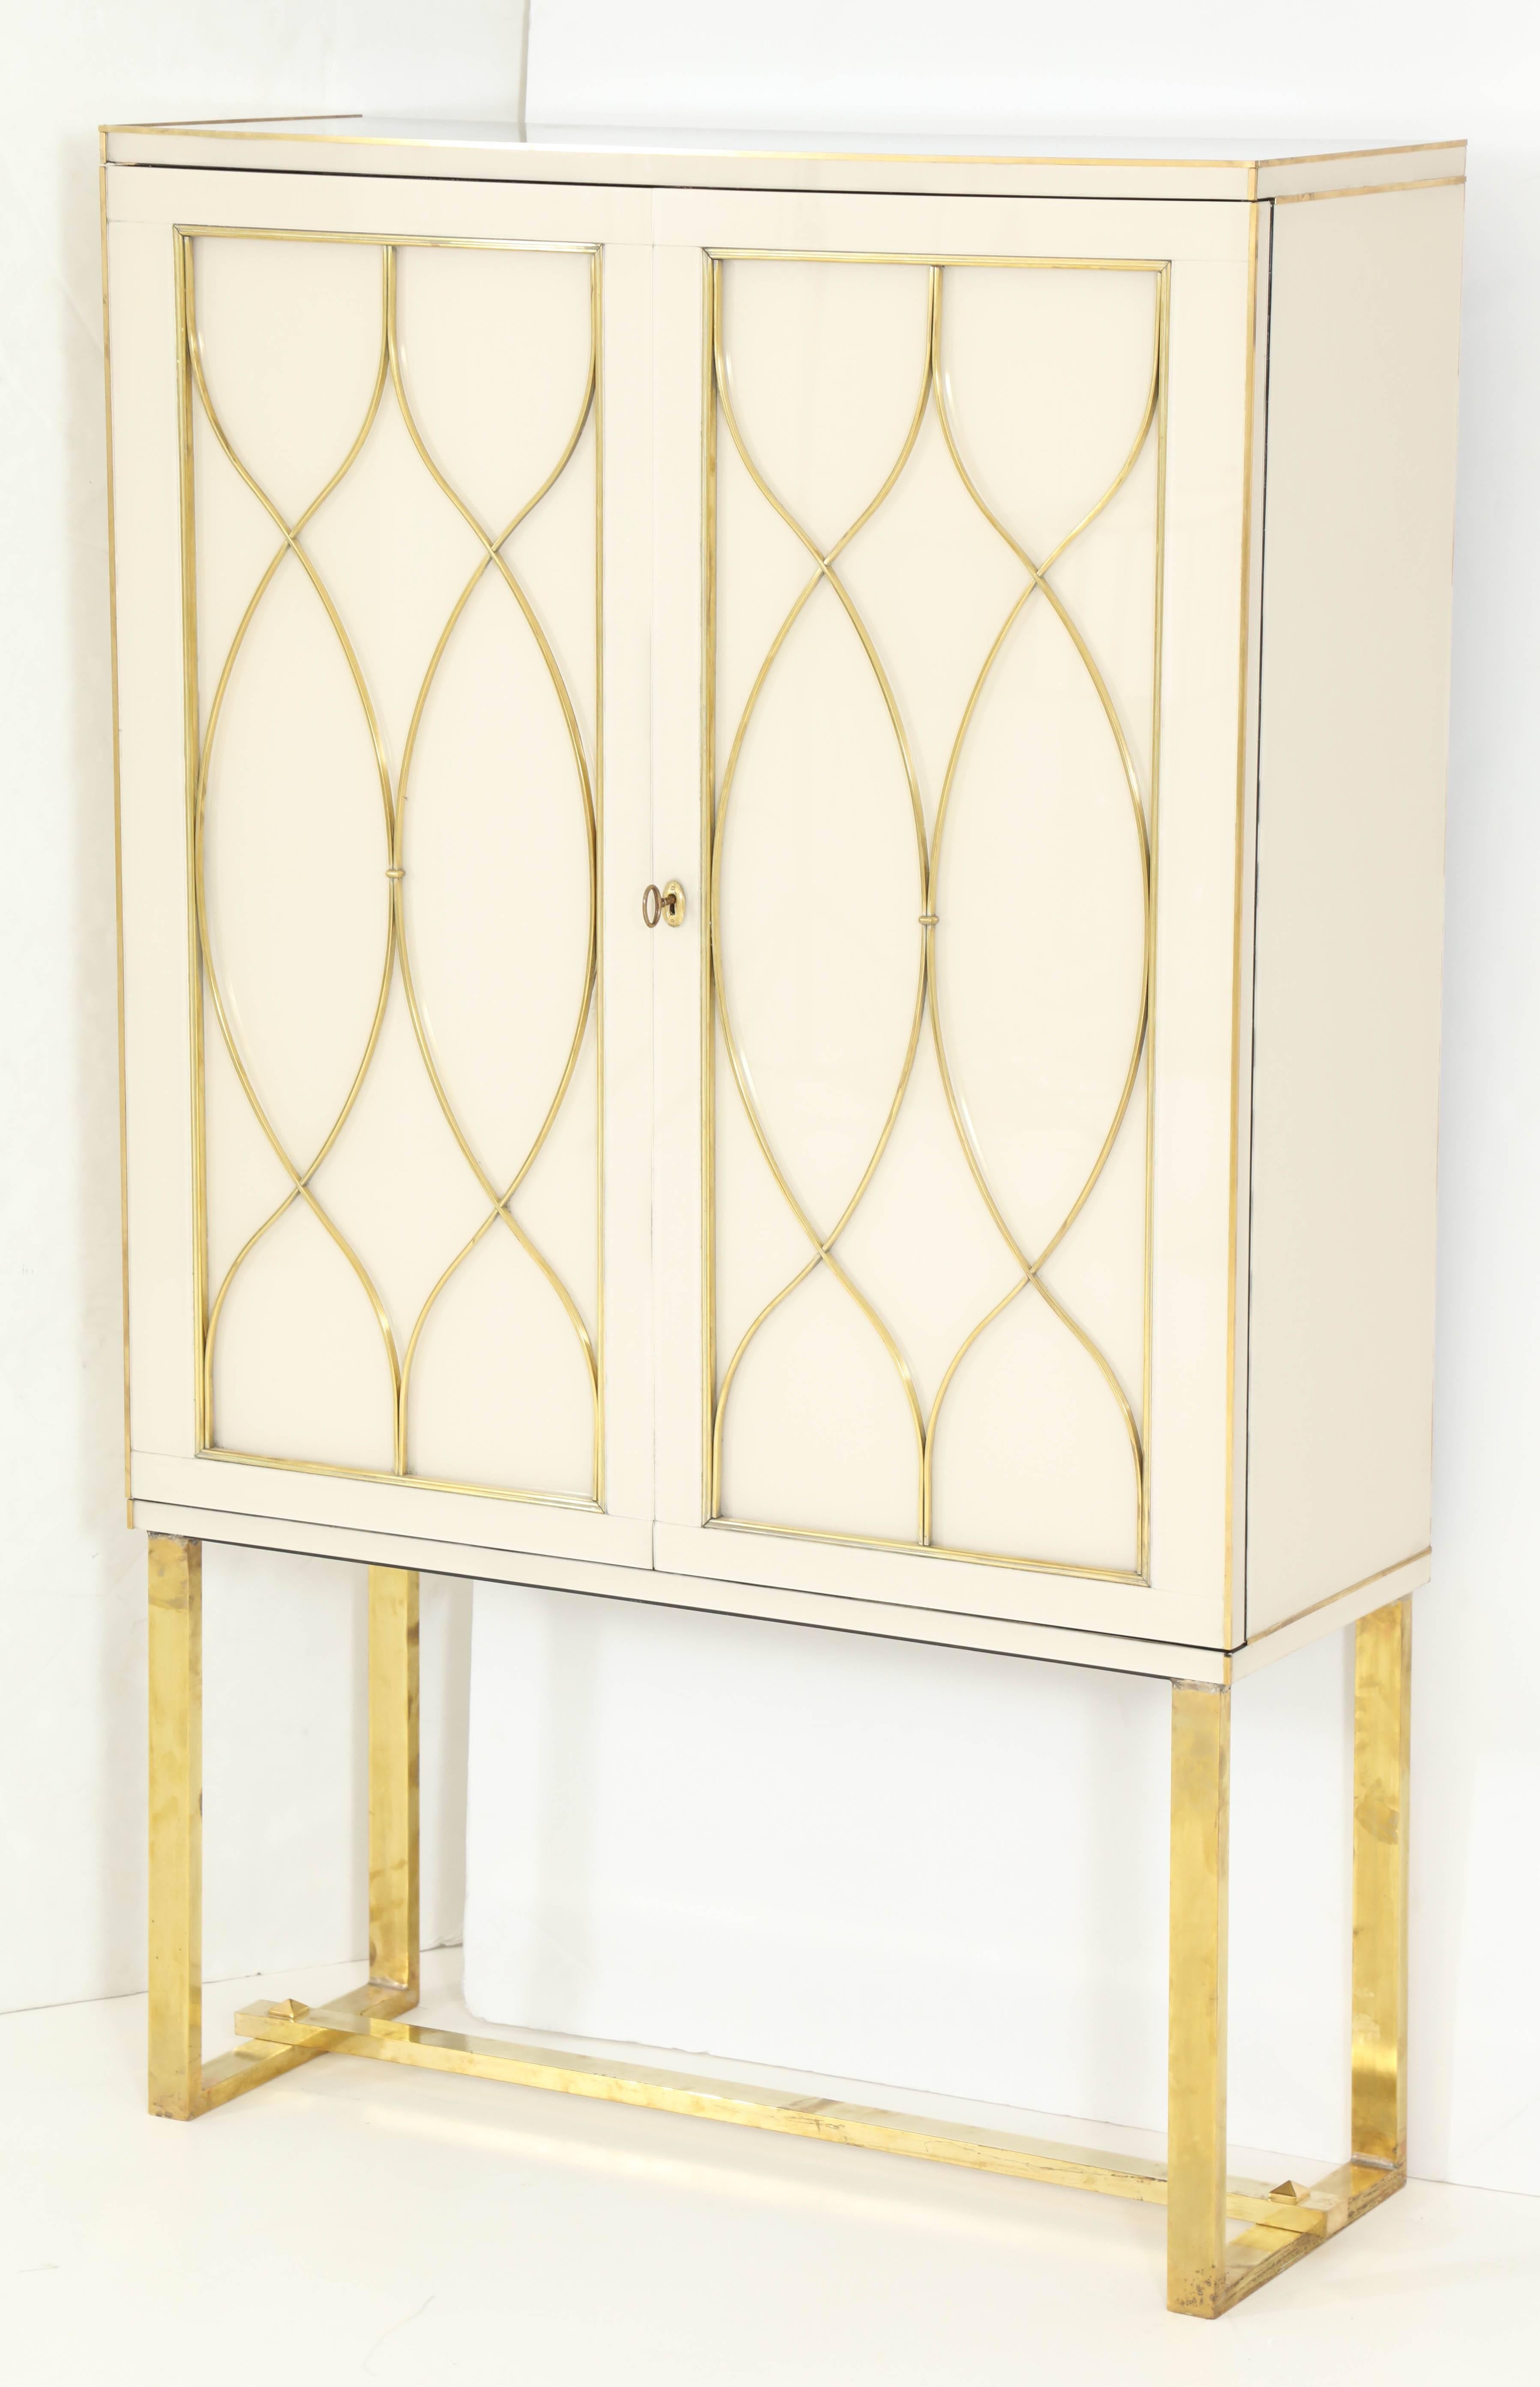 This Italian Mid-Century tall cabinet or dry bar is absolutely exquisite in its detail and craftmanship. Made of wood and covered in a high-gloss ivory colored venetian Opaline glass with beautiful brass inlays and brass flat front legs. Working